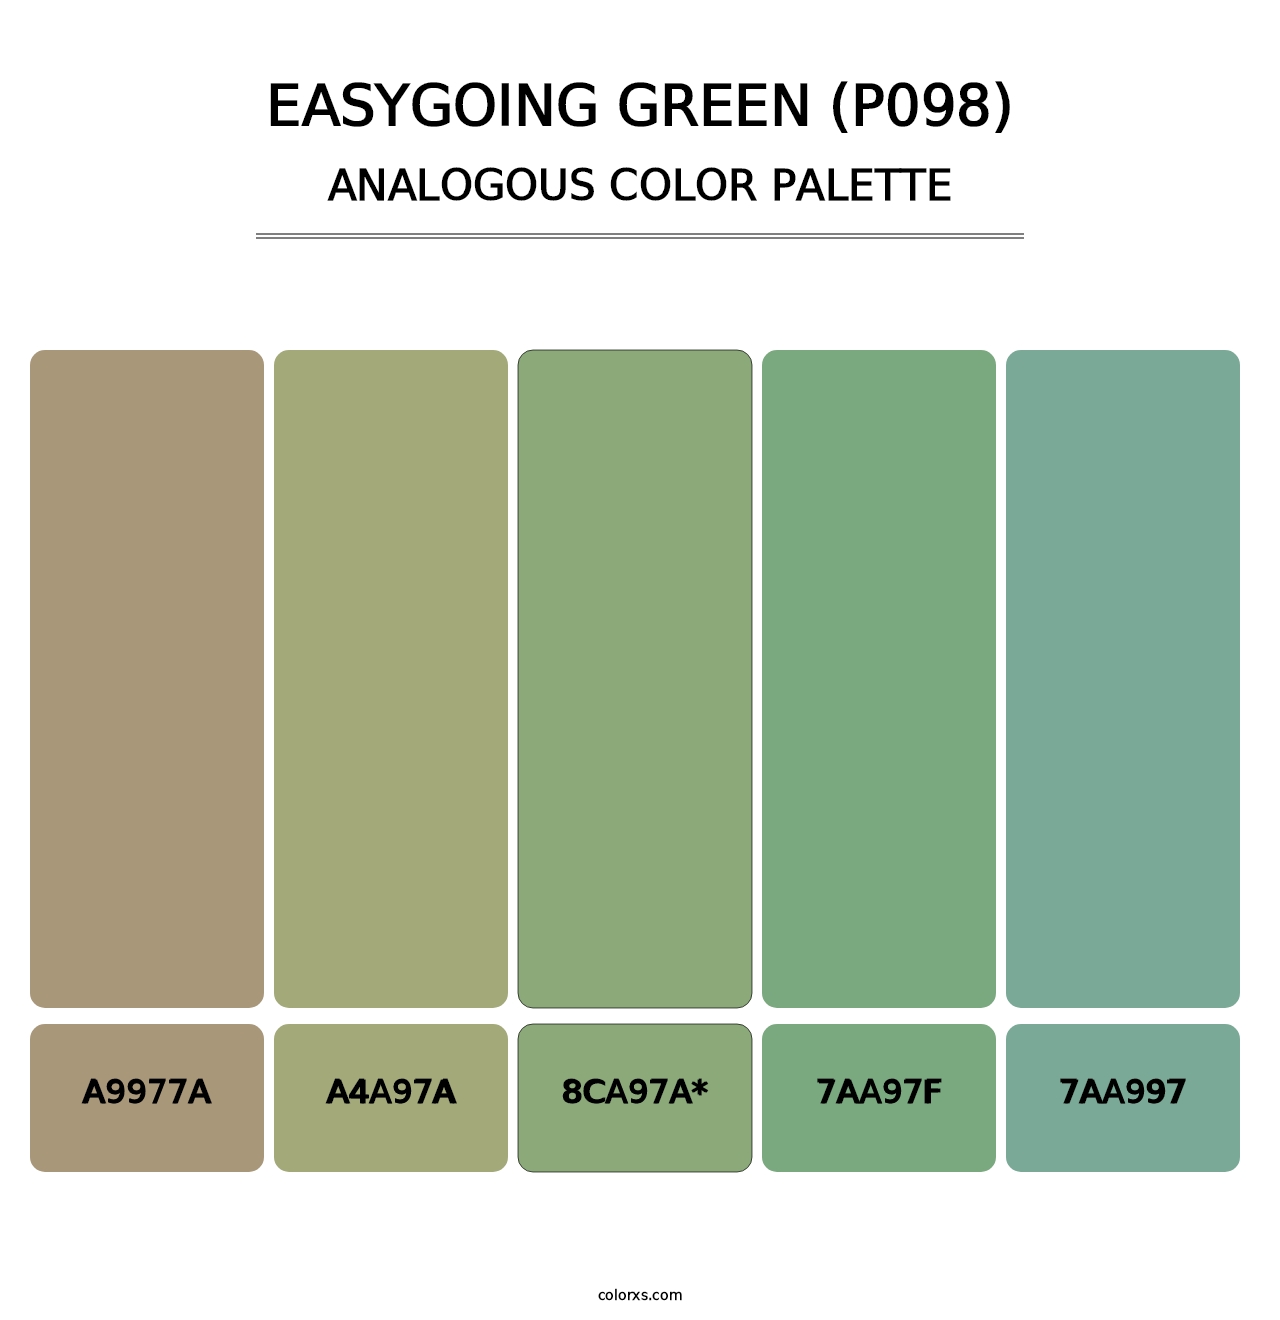 Easygoing Green (P098) - Analogous Color Palette